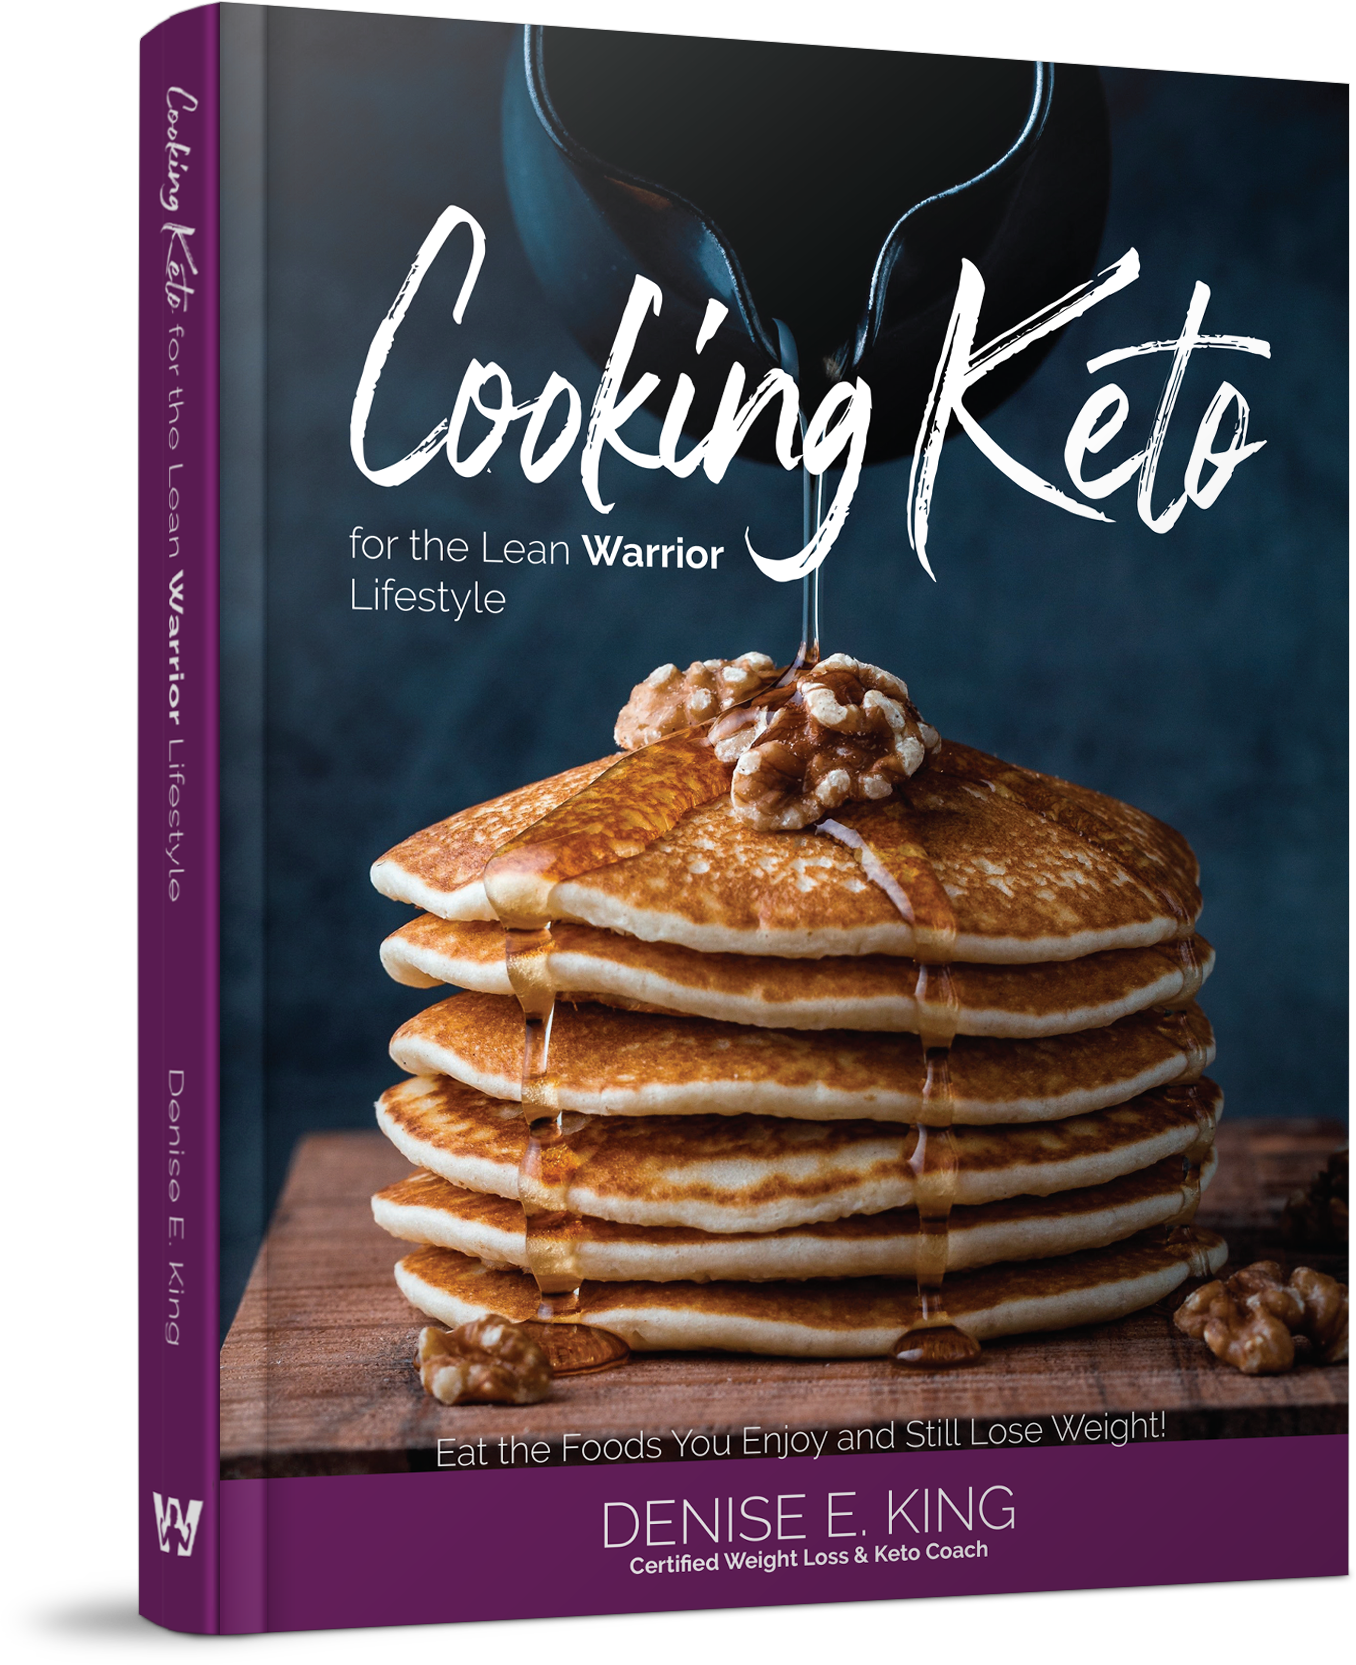 Cooking Keto for the Lean Warrior Lifestyle